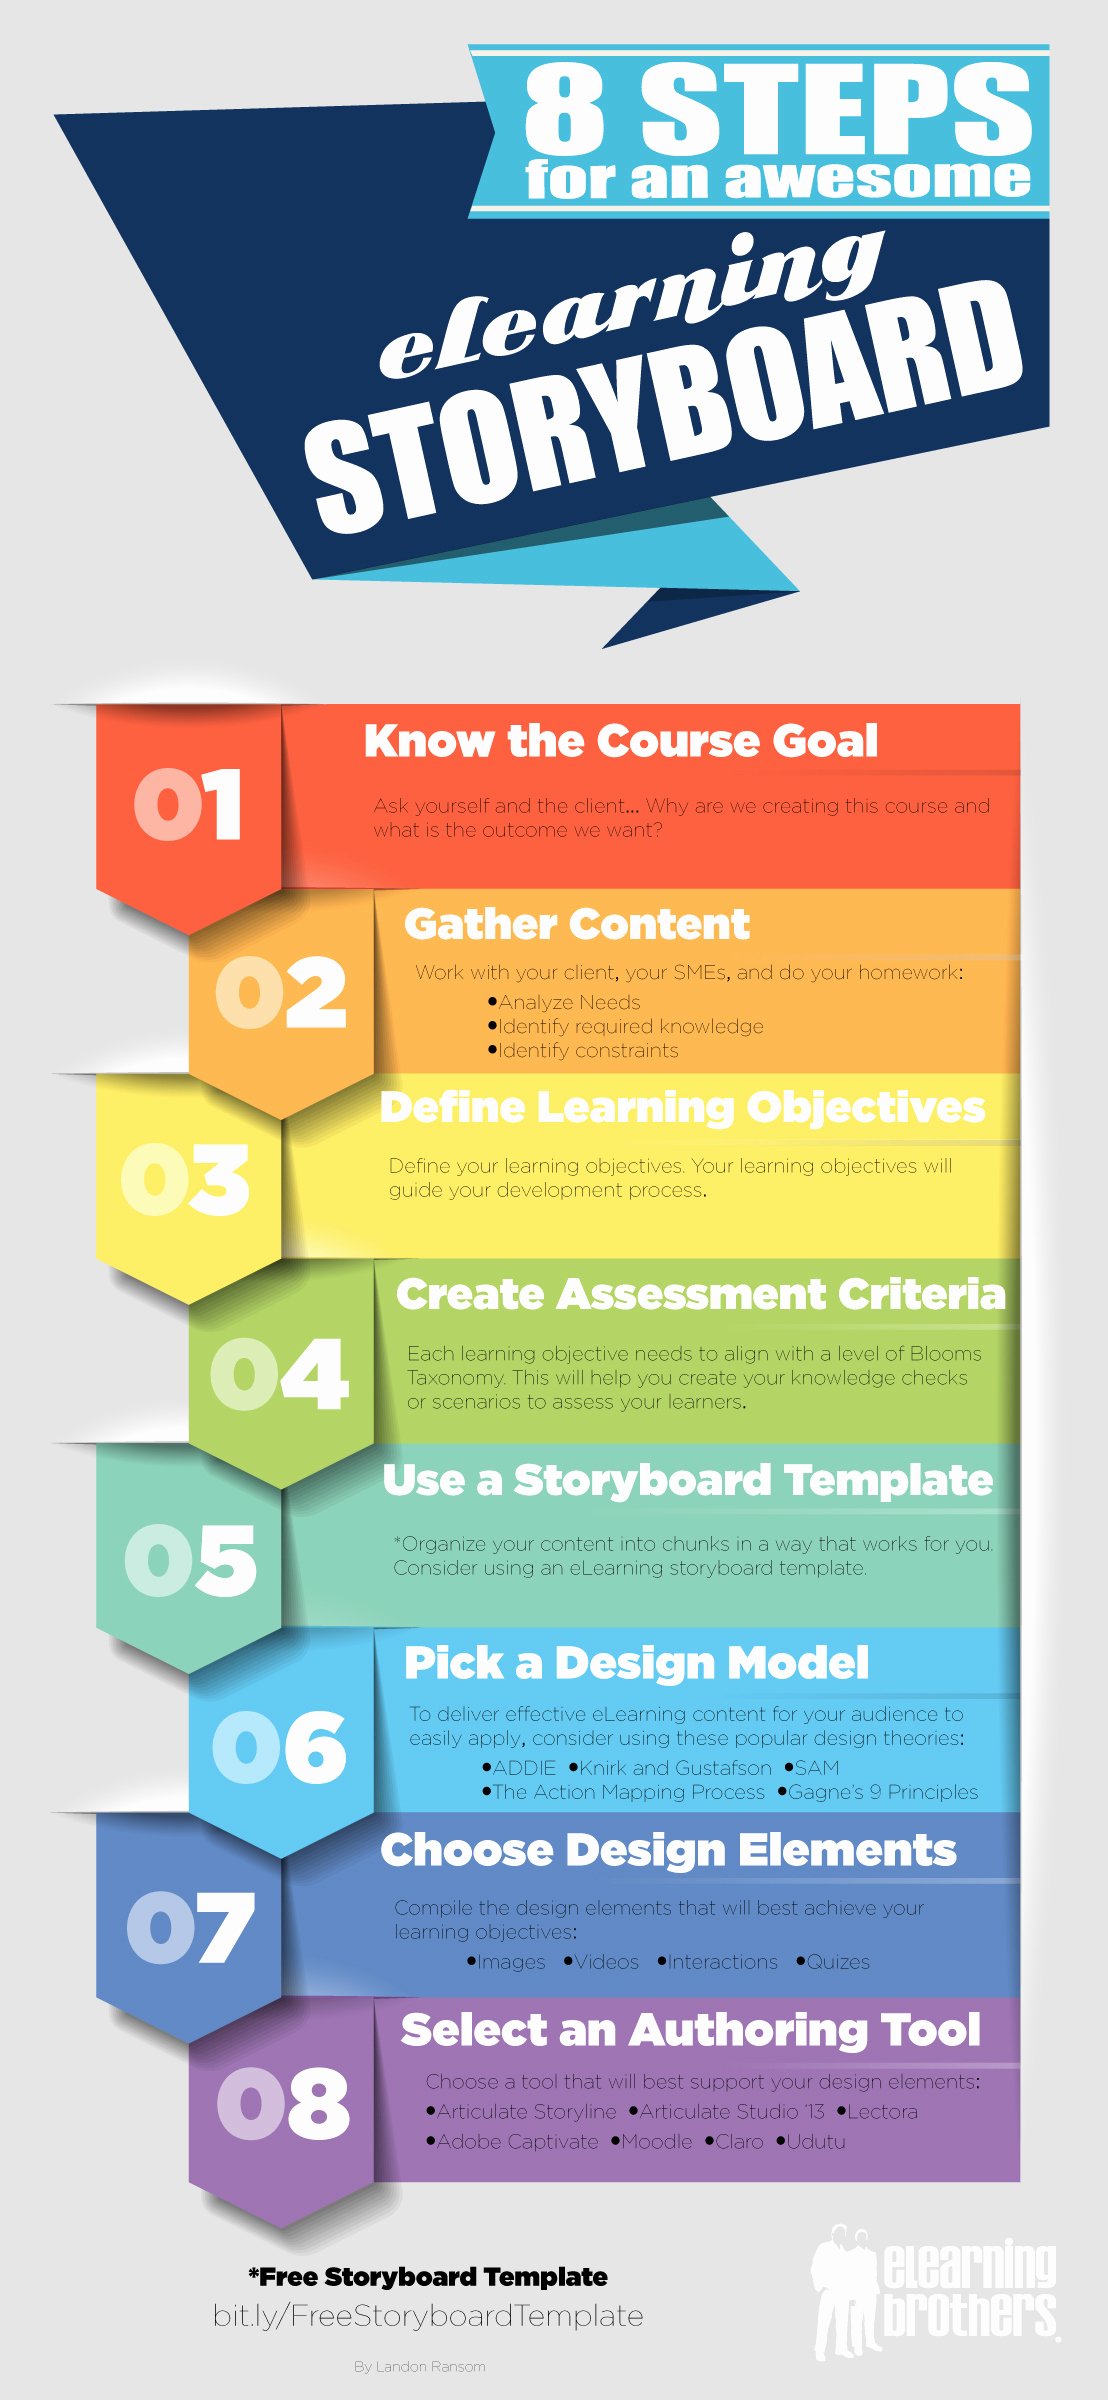 Captivate Storyboard Template New 8 Steps for An Awesome Elearning Storyboard Elearning